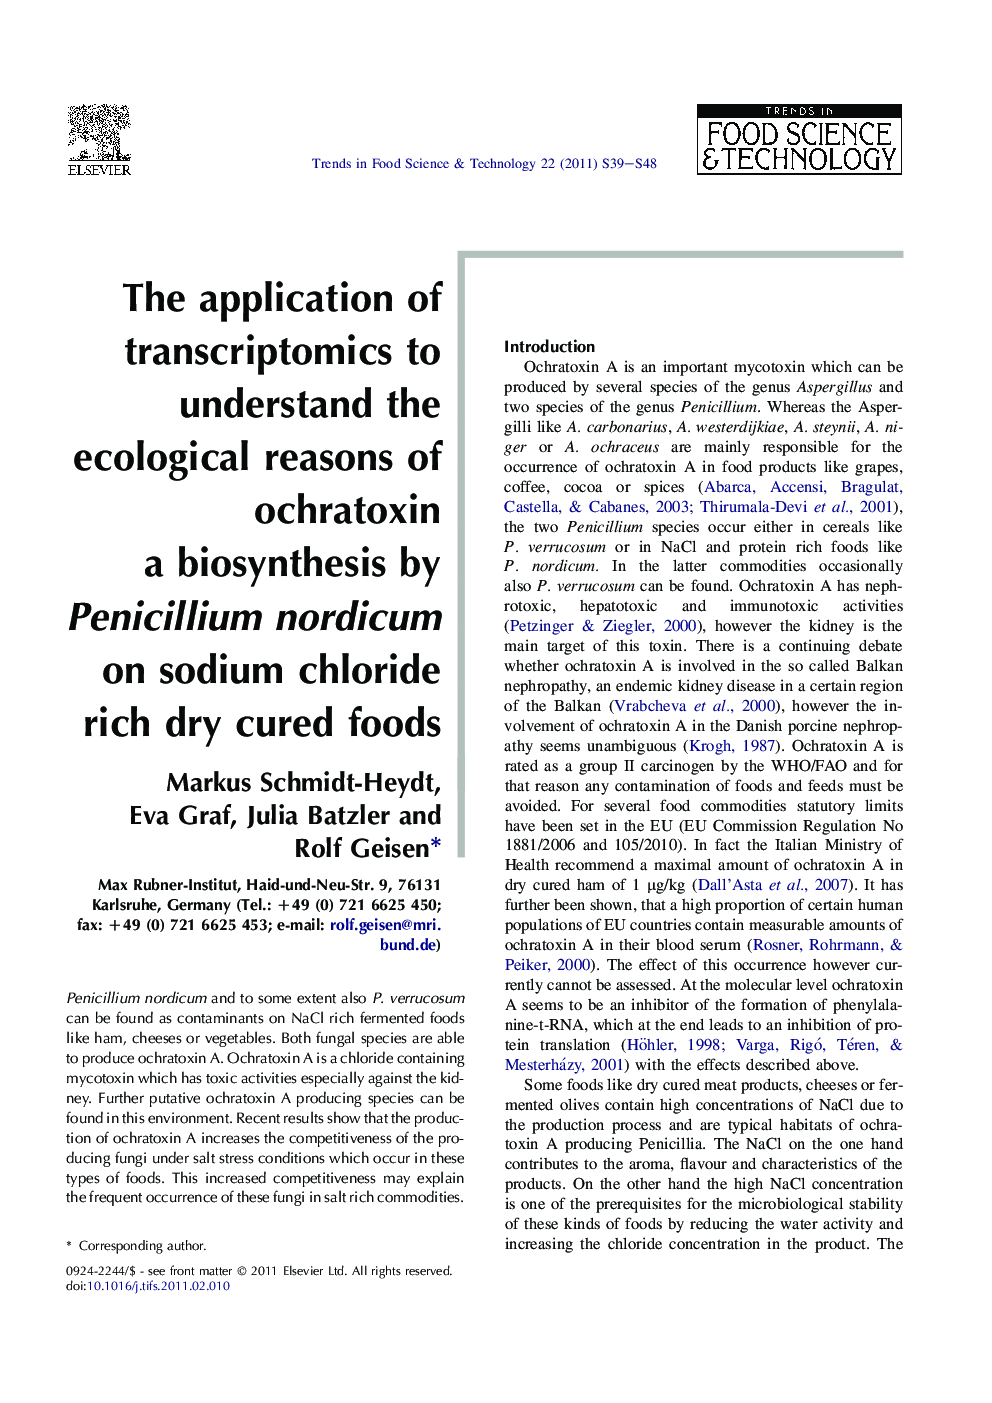 The application of transcriptomics to understand the ecological reasons of ochratoxin a biosynthesis by Penicillium nordicum on sodium chloride rich dry cured foods